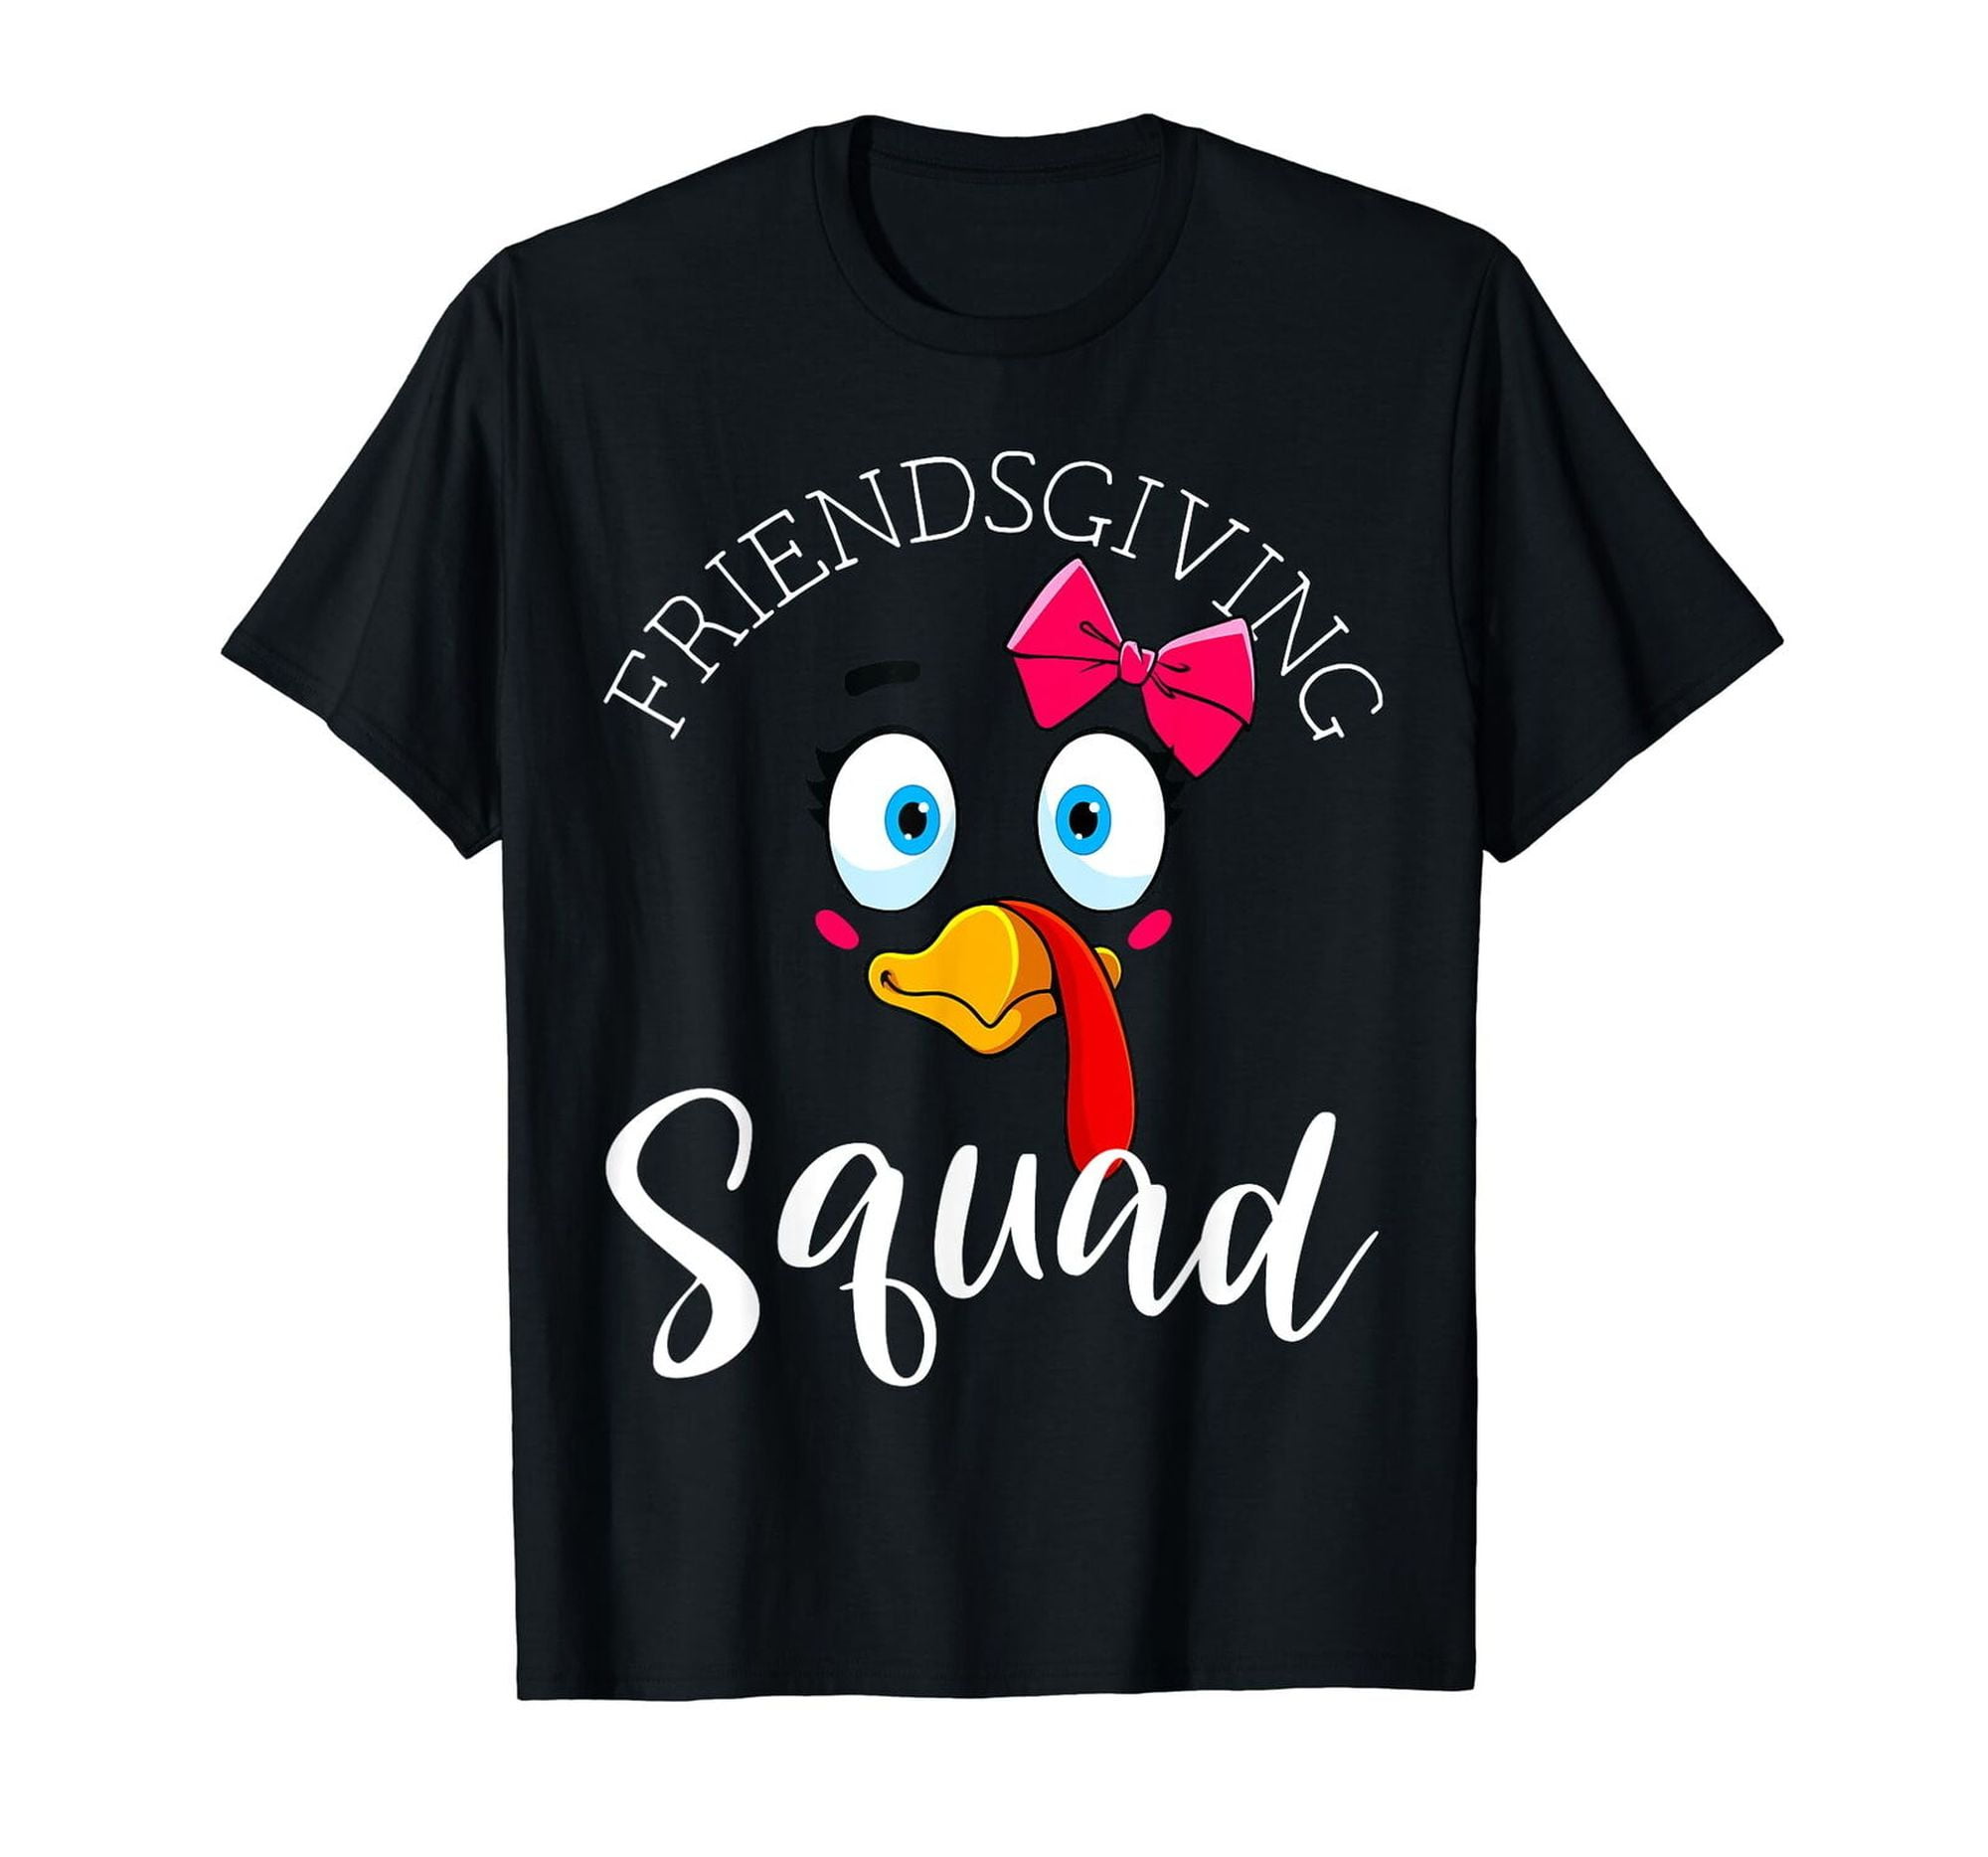 Turkey Day Squad Shirts: Level Up Your Friendsgiving Celebration with ...